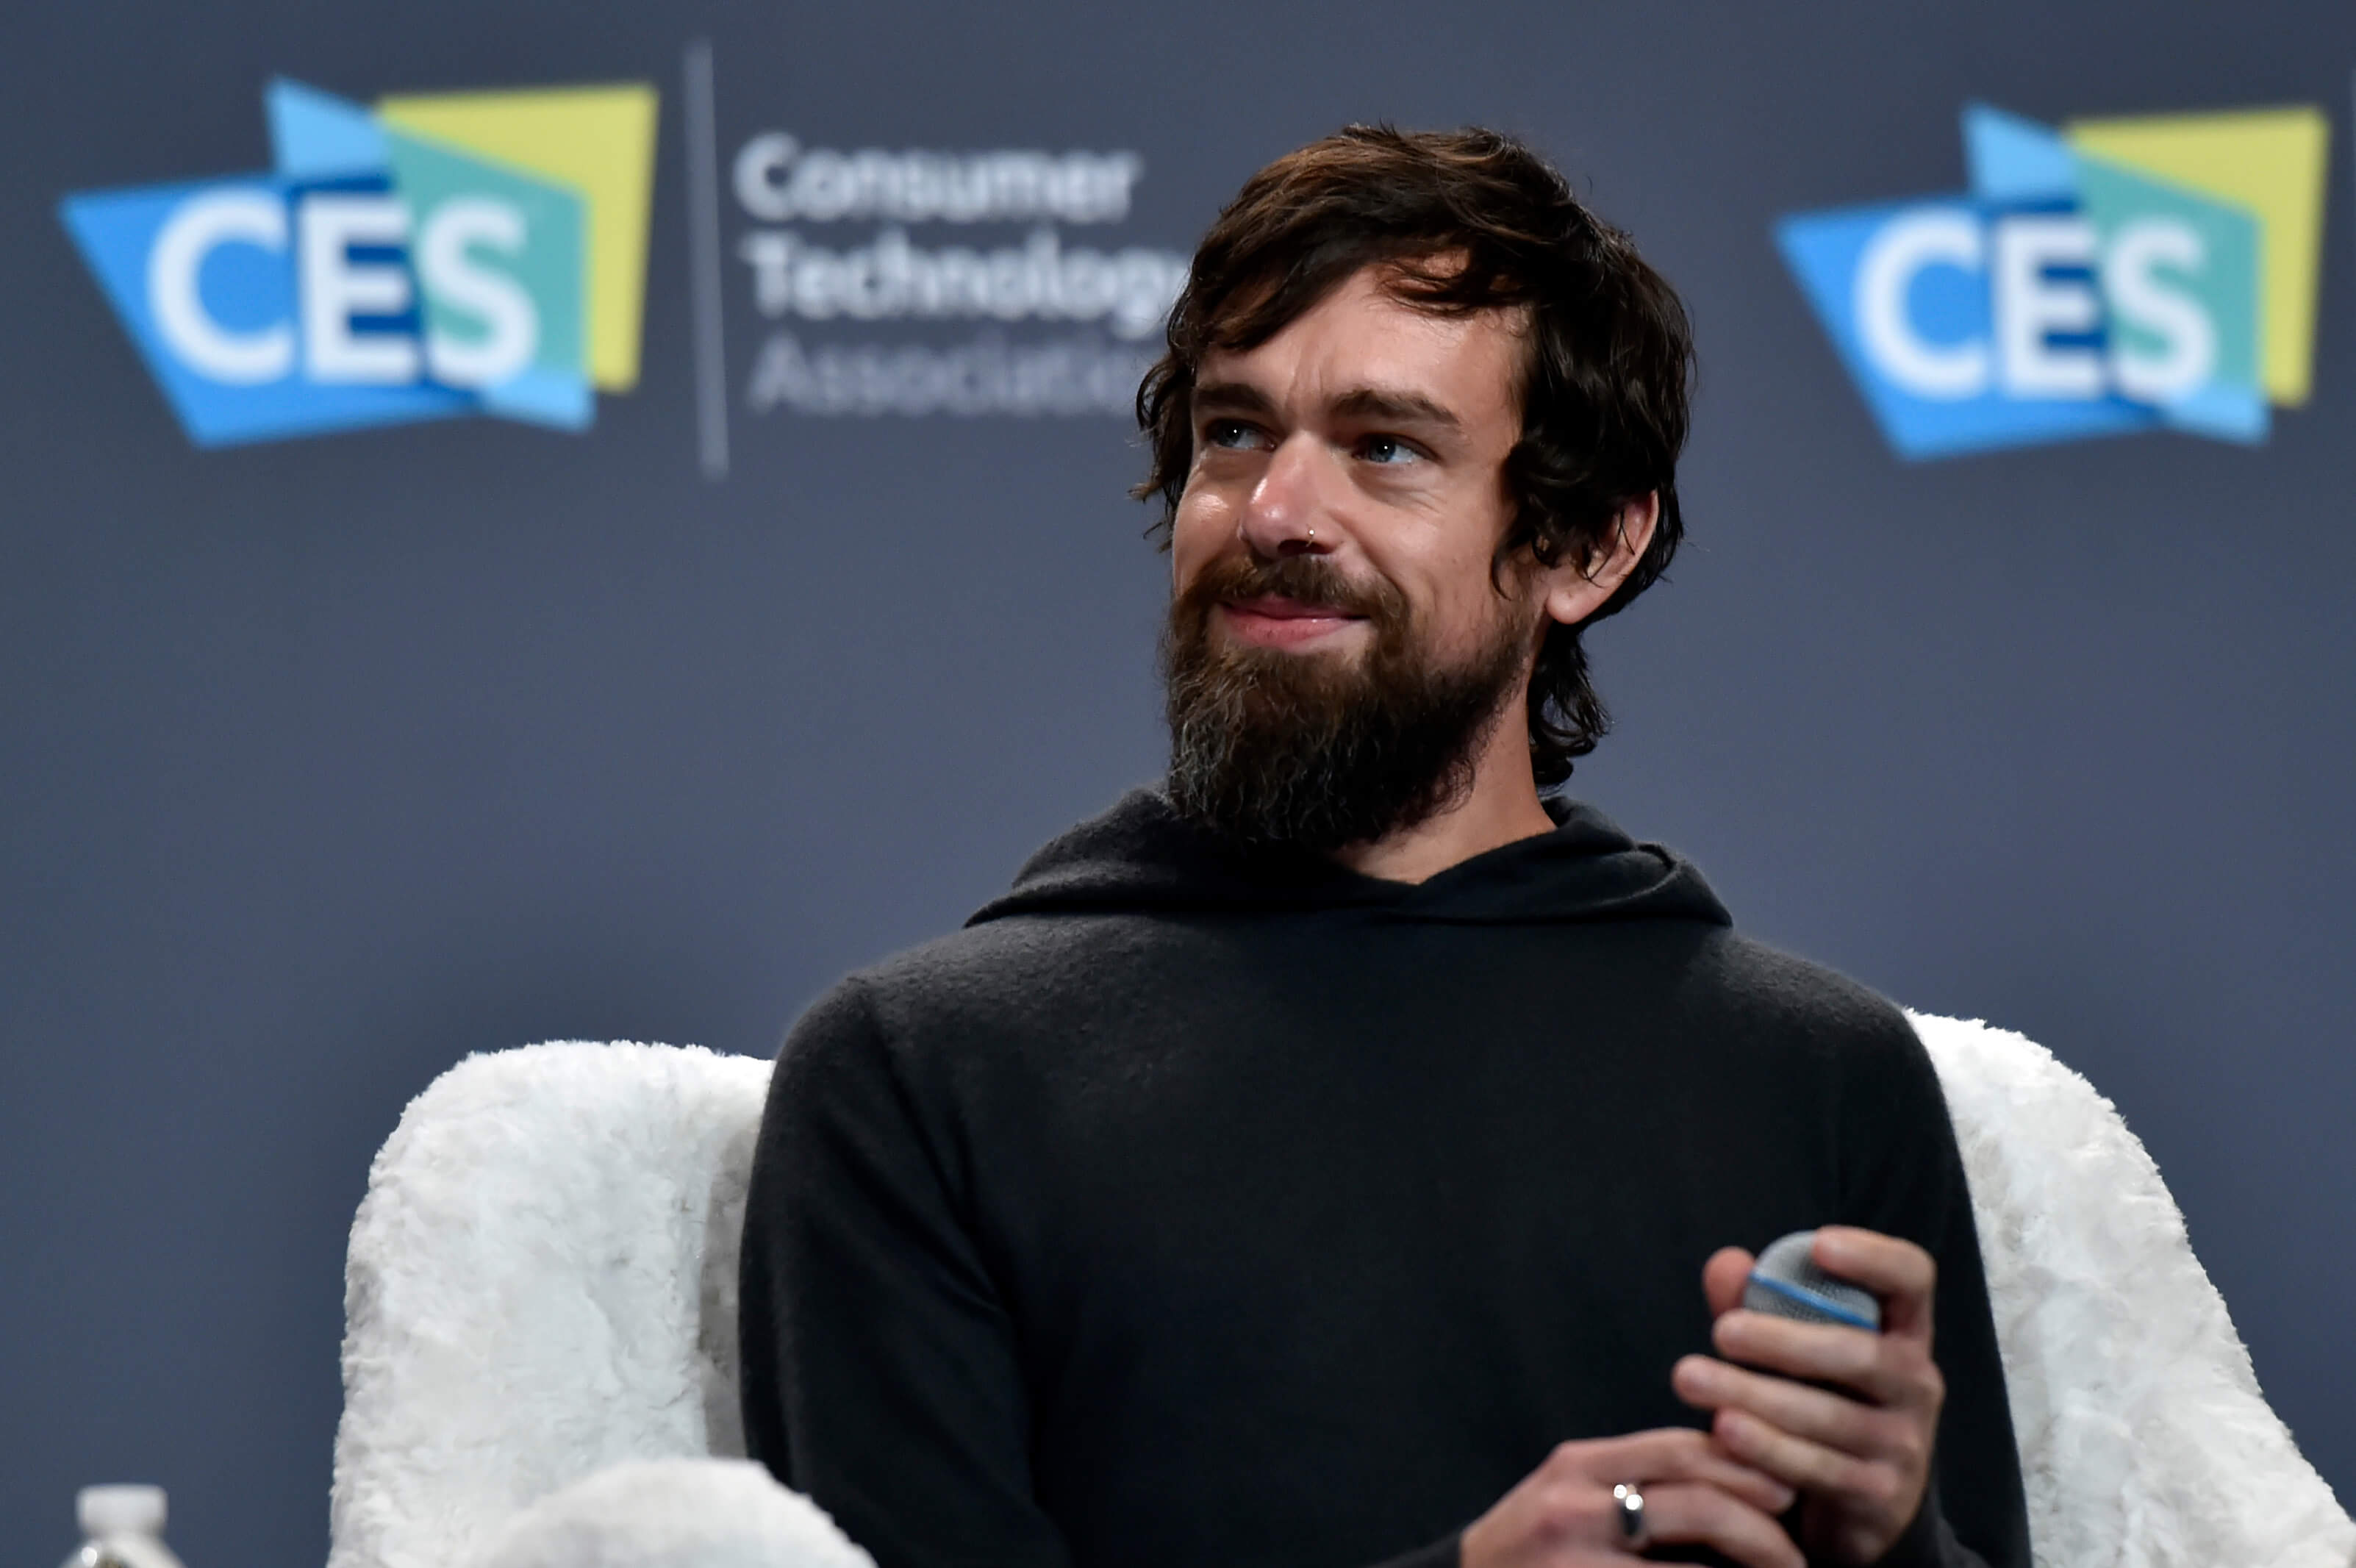 Twitter CEO Jack Dorsey speaks during a press event at CES 2019